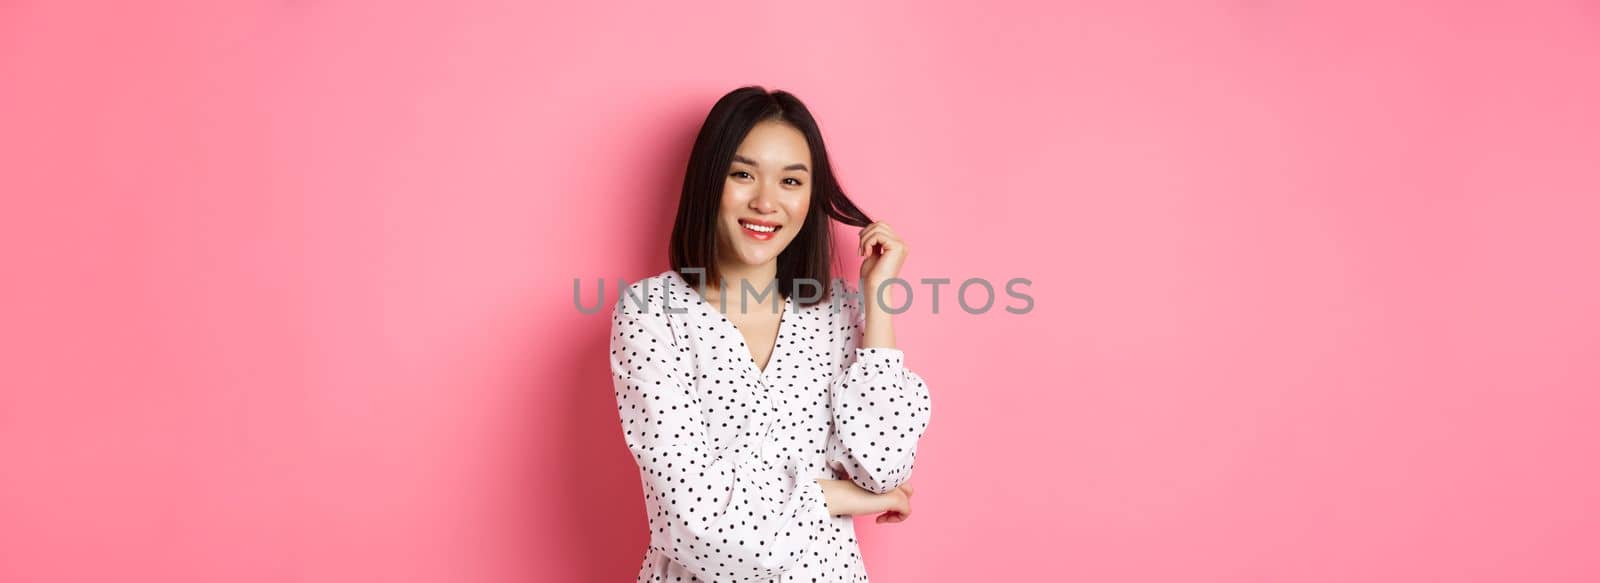 Cute asian female brunette in trendy dress, playing with hair and smiling flirty, standing in dress over pink background.